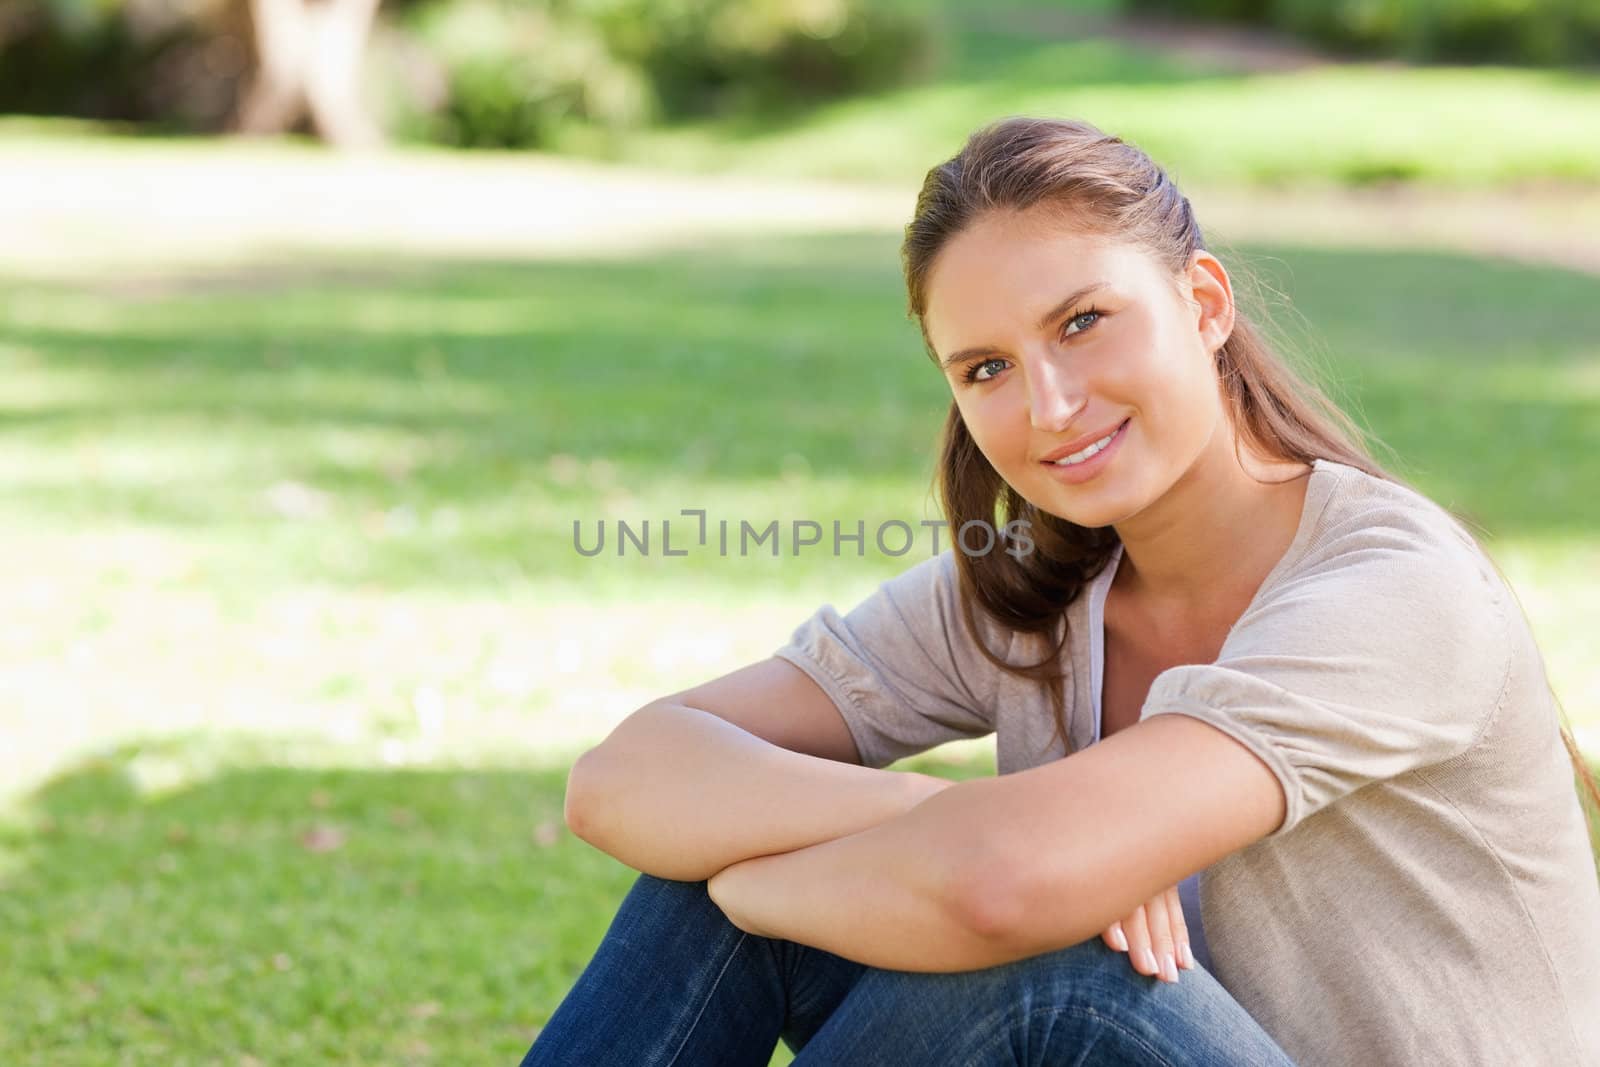 Smiling young woman relaxing in the park